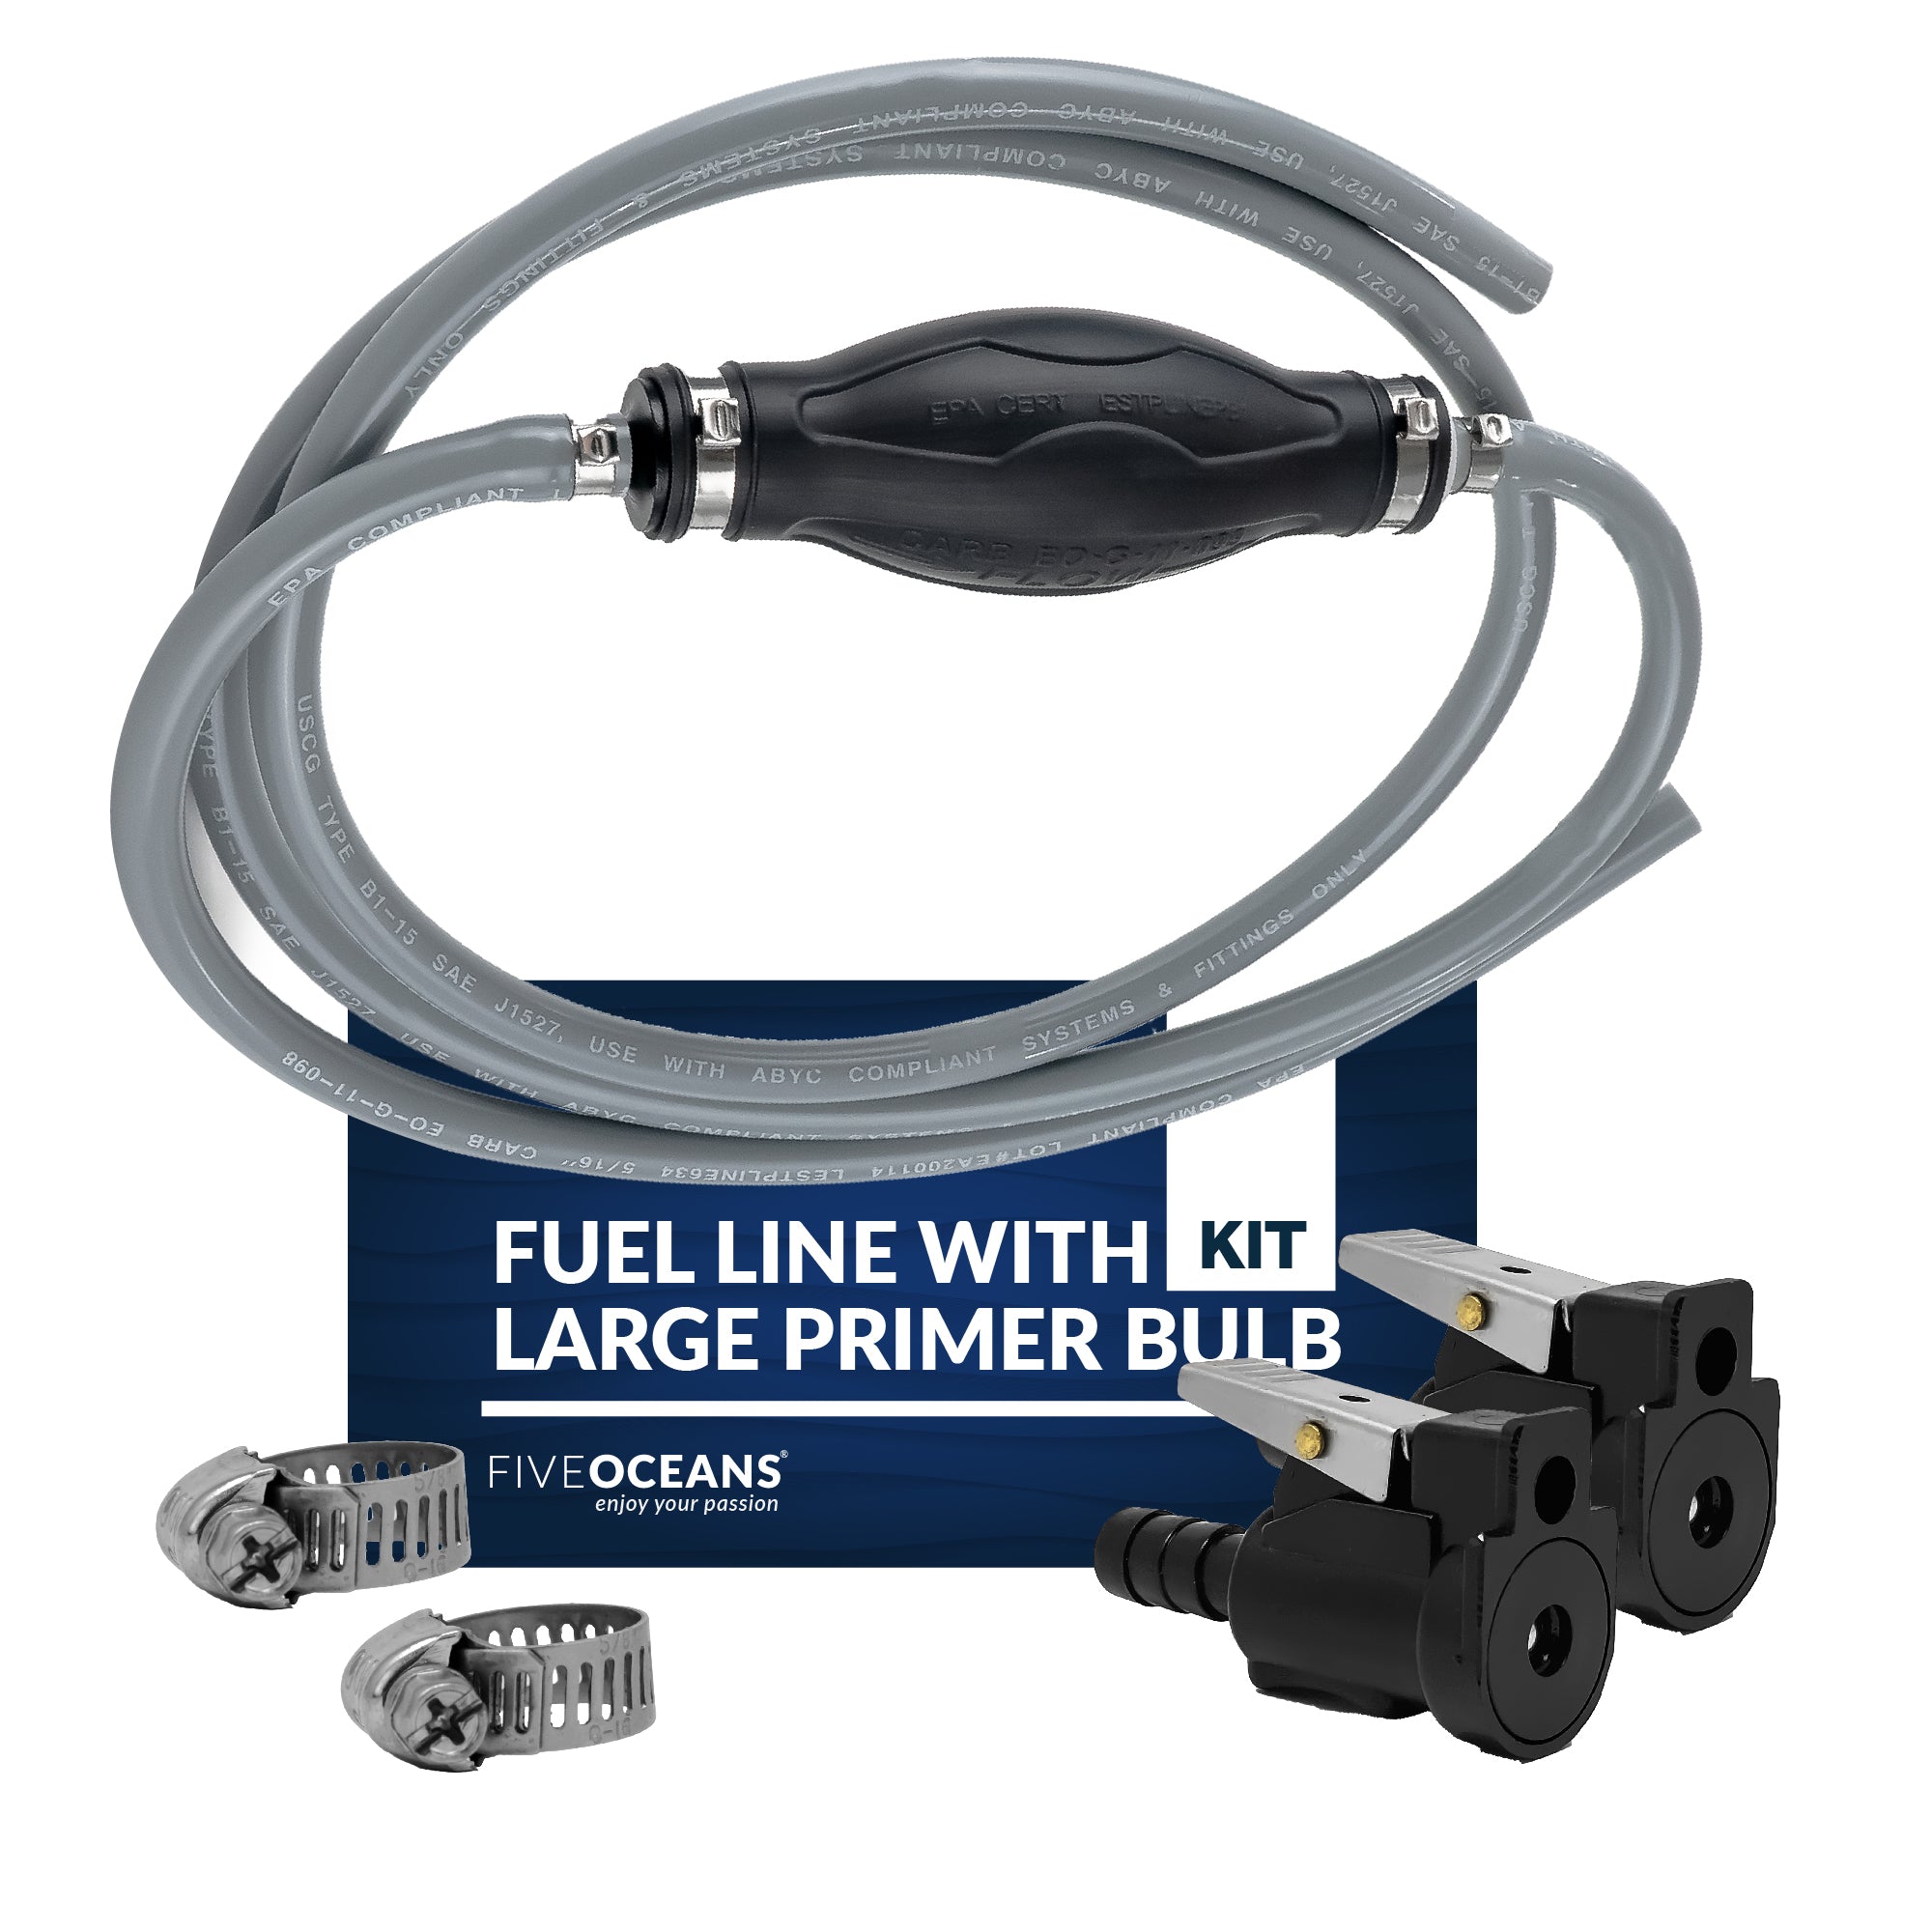 5/16" Outboard Motor Fuel Line with Large Primer Bulb for OMC/Johnson/Evinrude, 6' Long, EPA/CARB - FO3100-C1